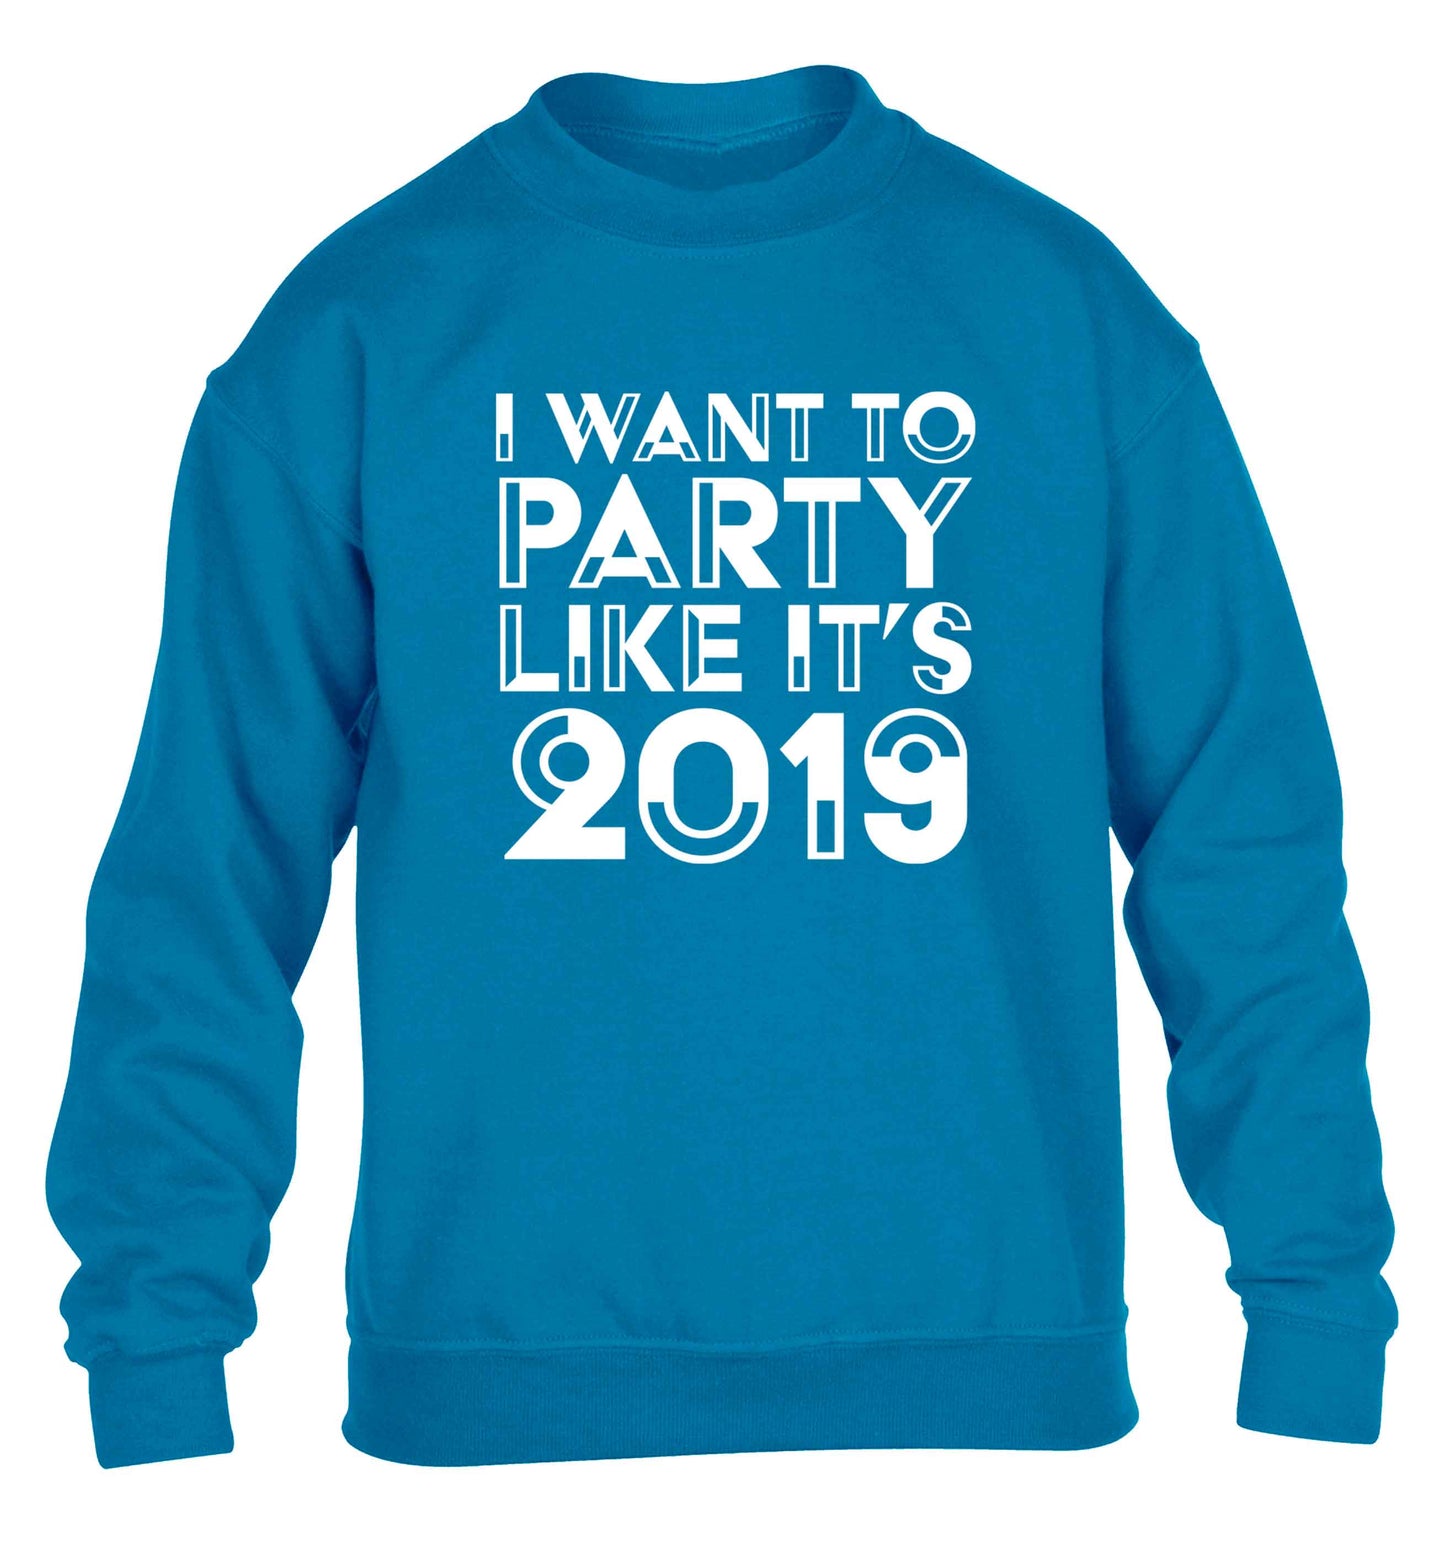 I want to party like it's 2019 children's blue sweater 12-13 Years